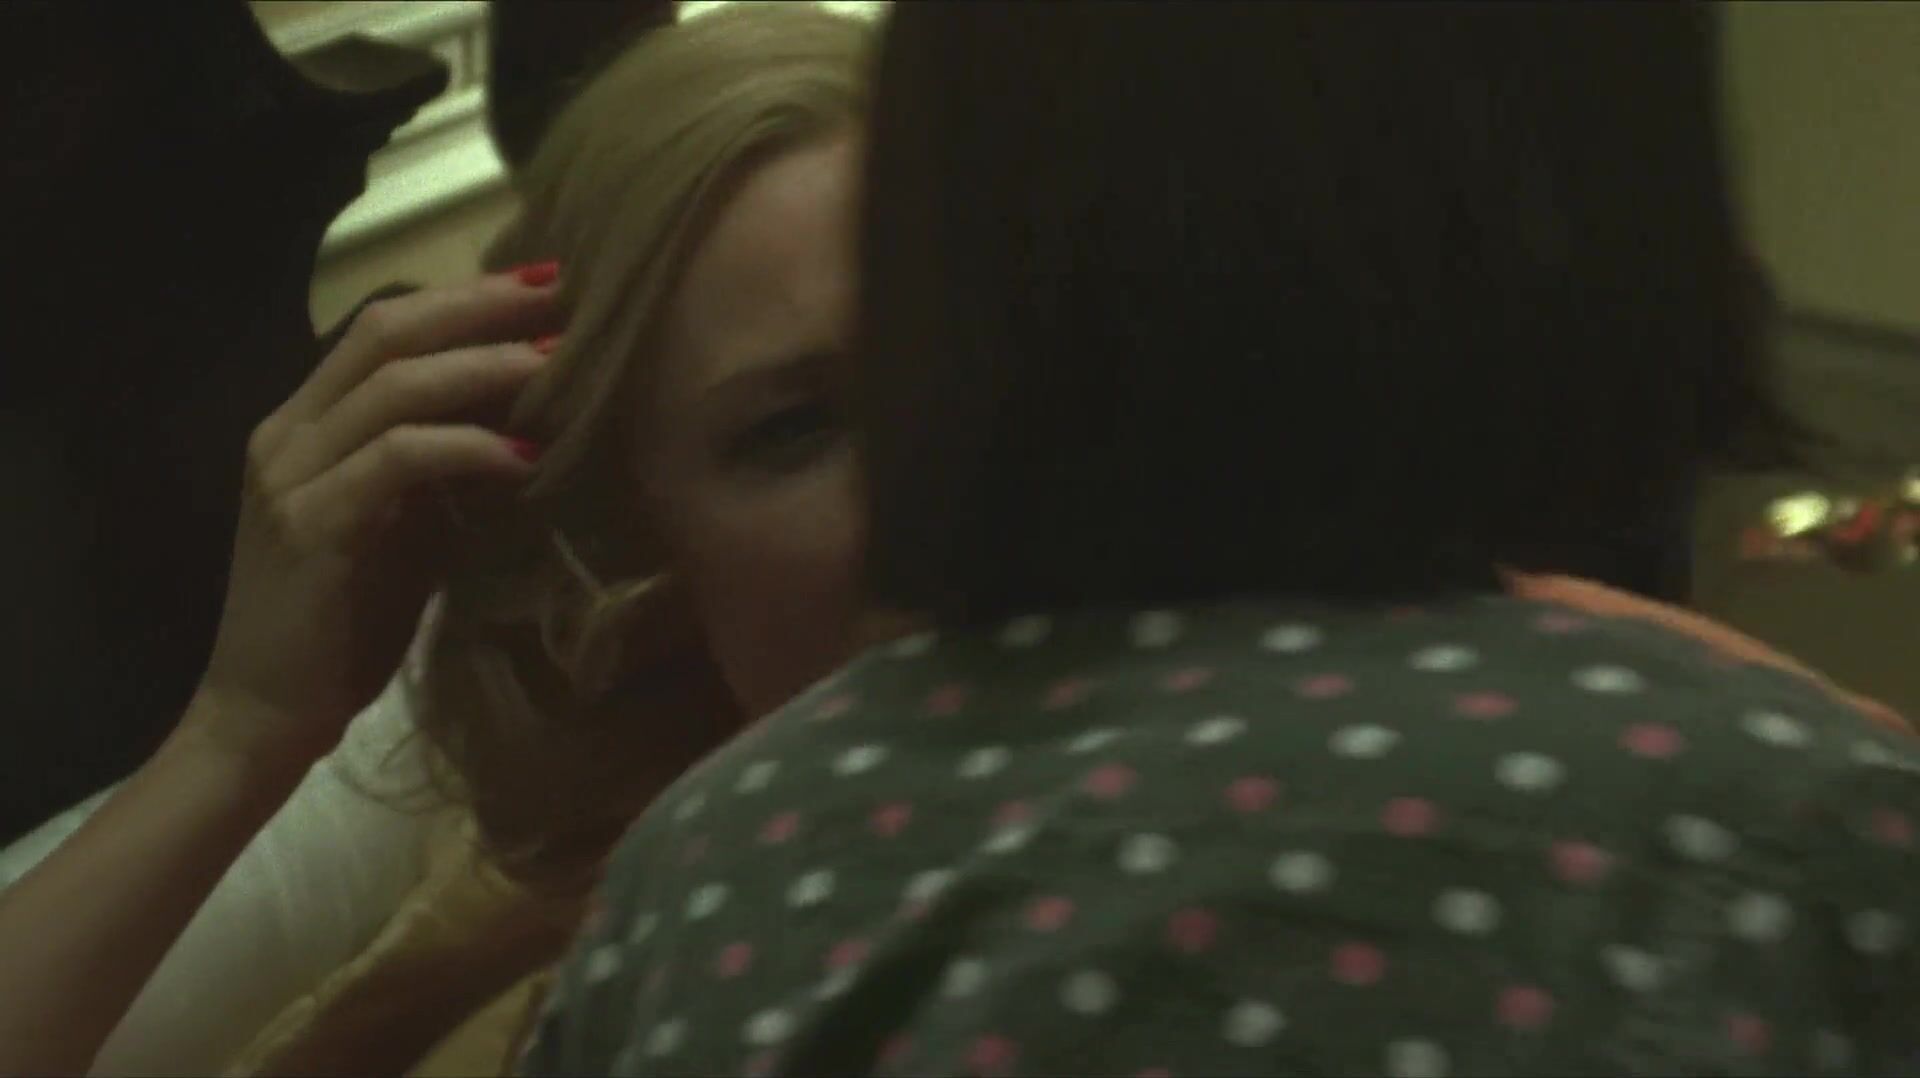 Sexu Erotic lesbian women from movie industry bang each other in drama film Carol (2014) Qwertty